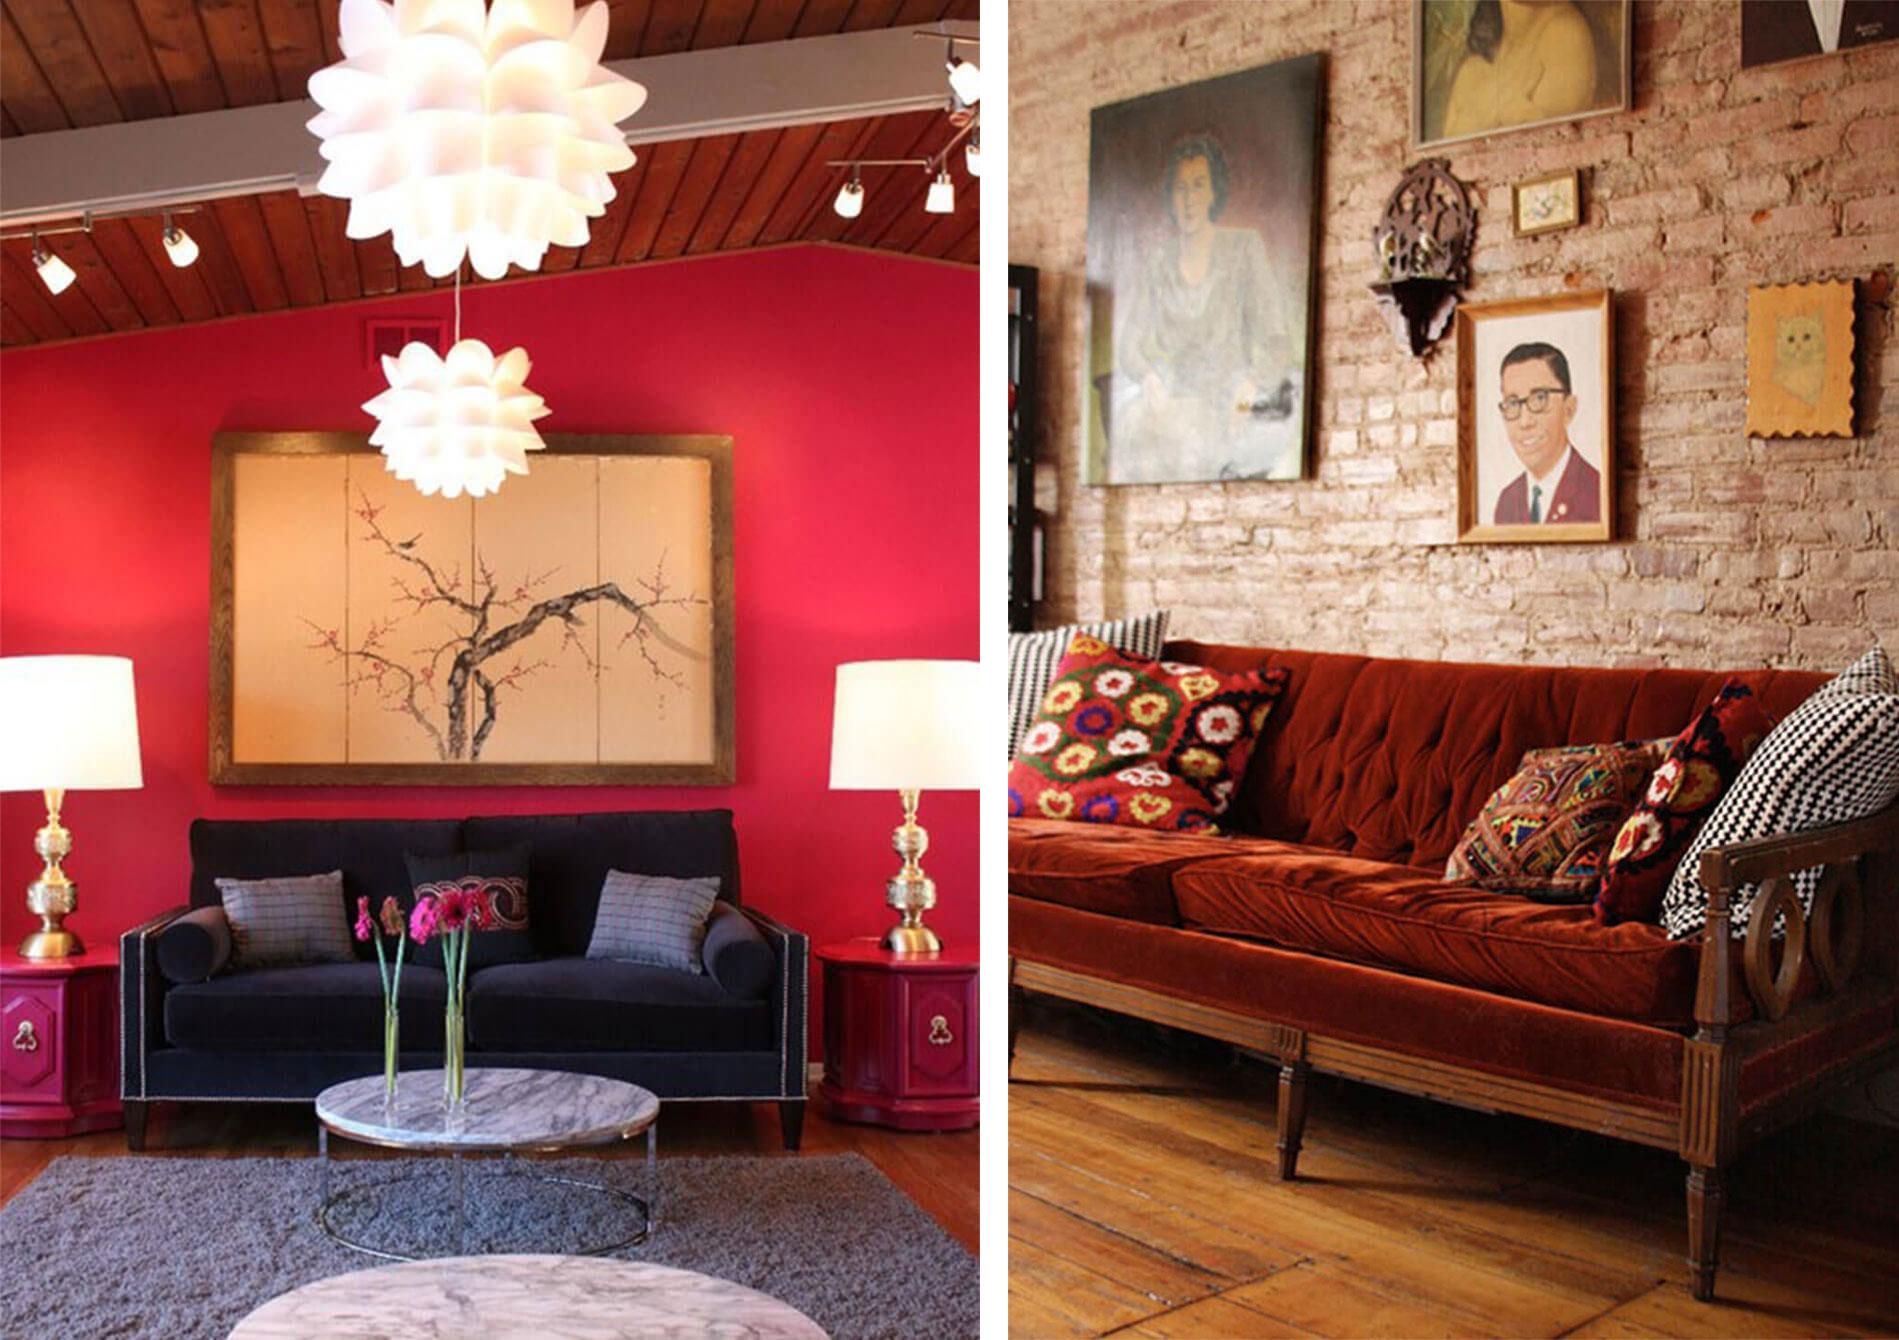 bold and beautiful: 7 red hot living room ideas | inspiration